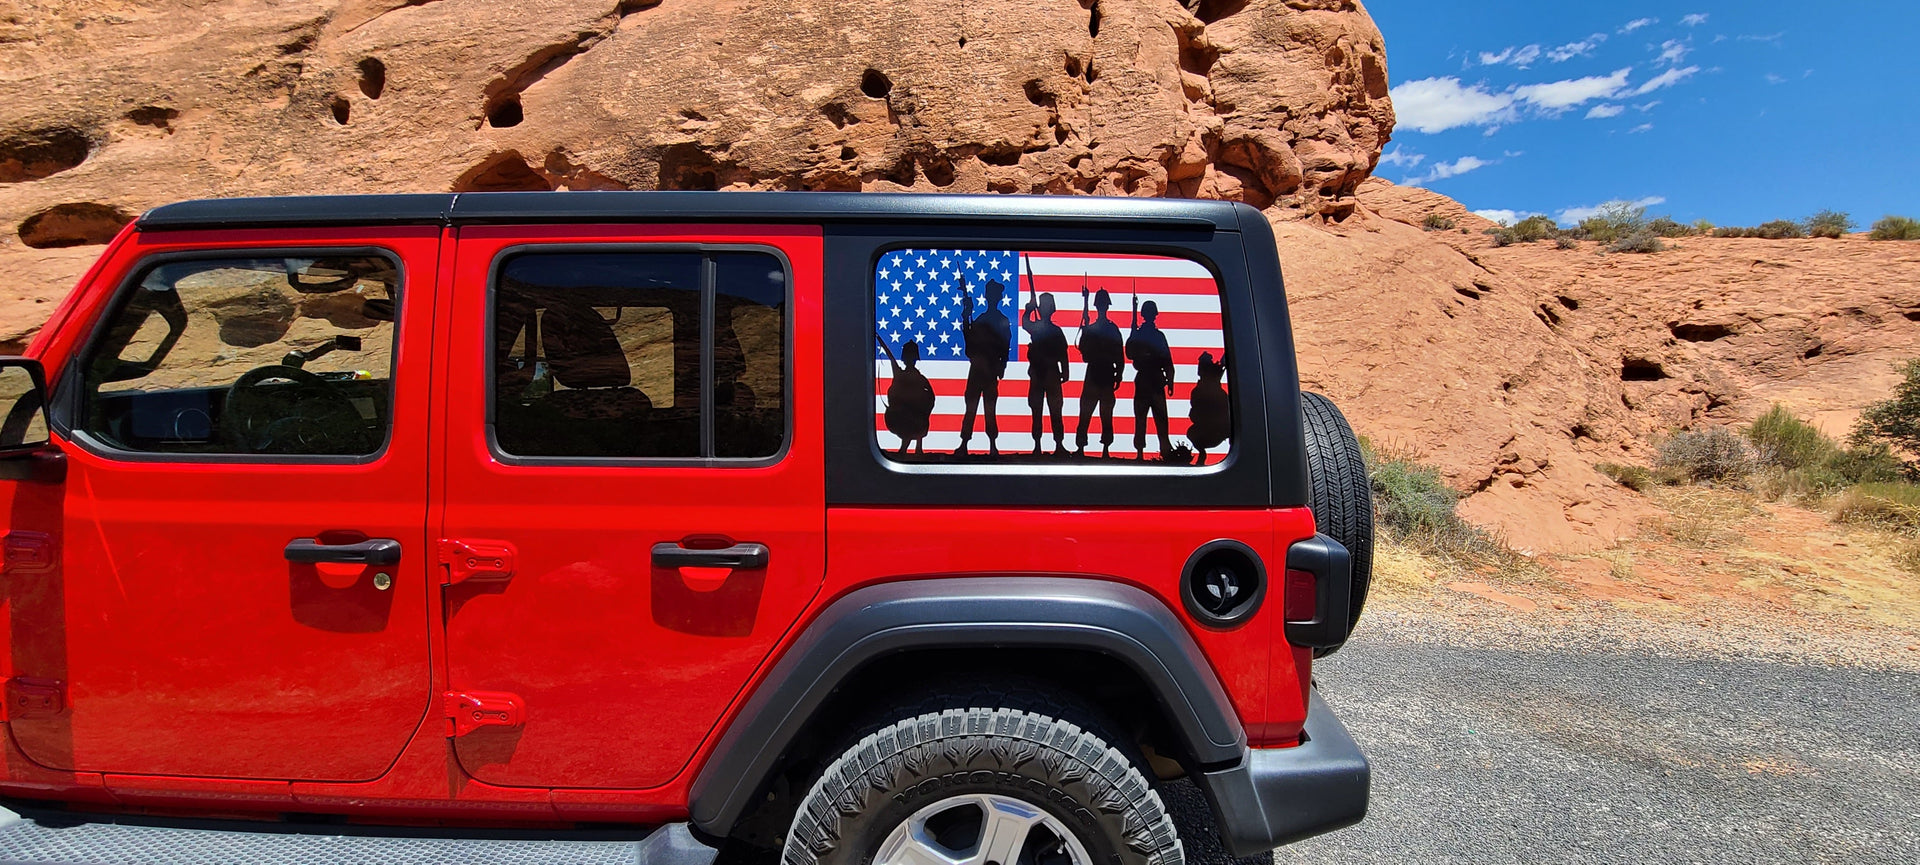 USA Flag with Silhouettes of solders - Crosscountrycreations